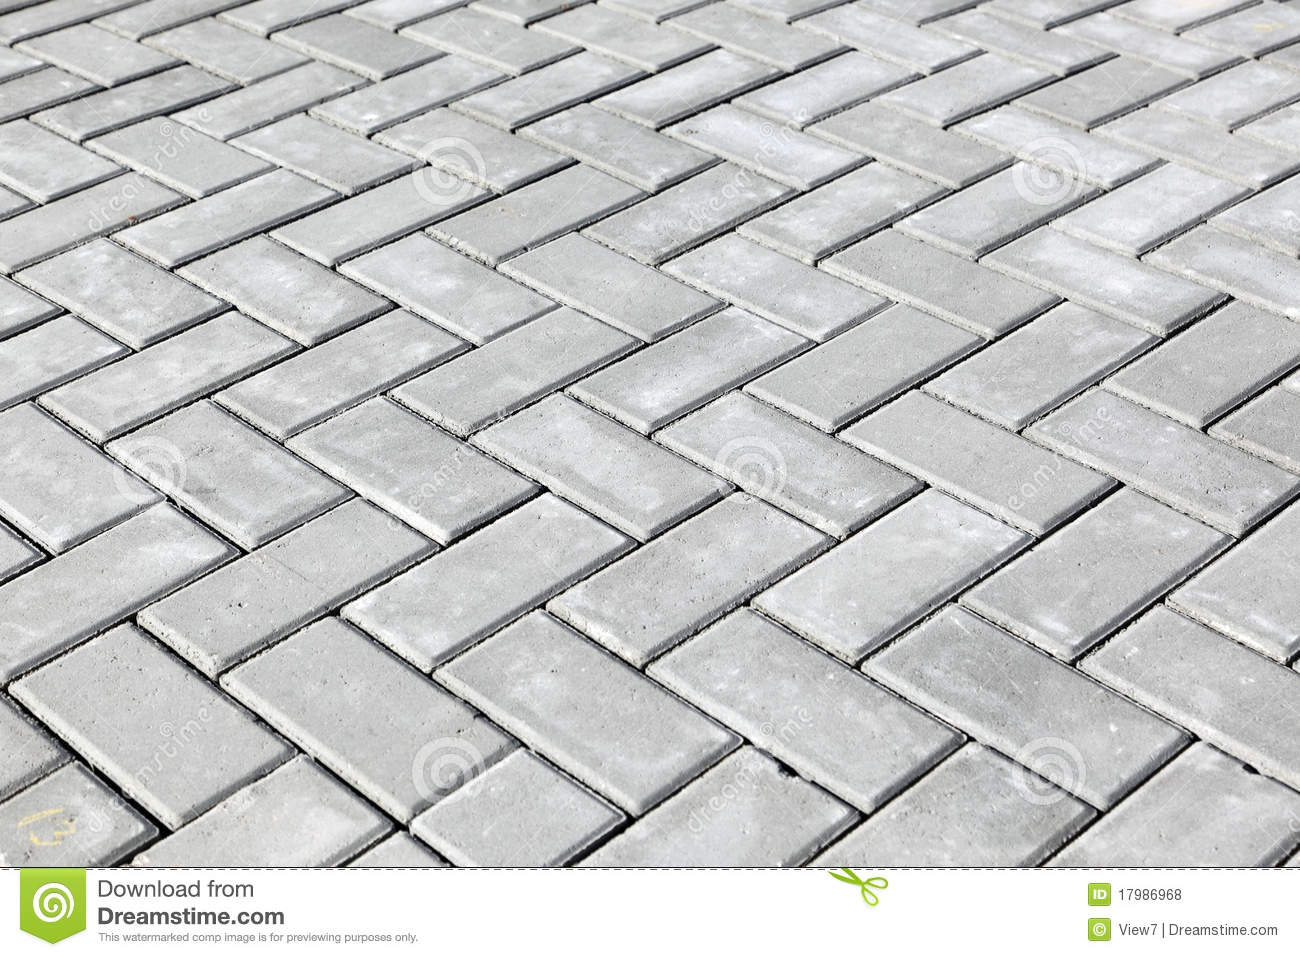 Concrete Bricks Laid In A Zig Zag Pattern On A Street Walkway Or    